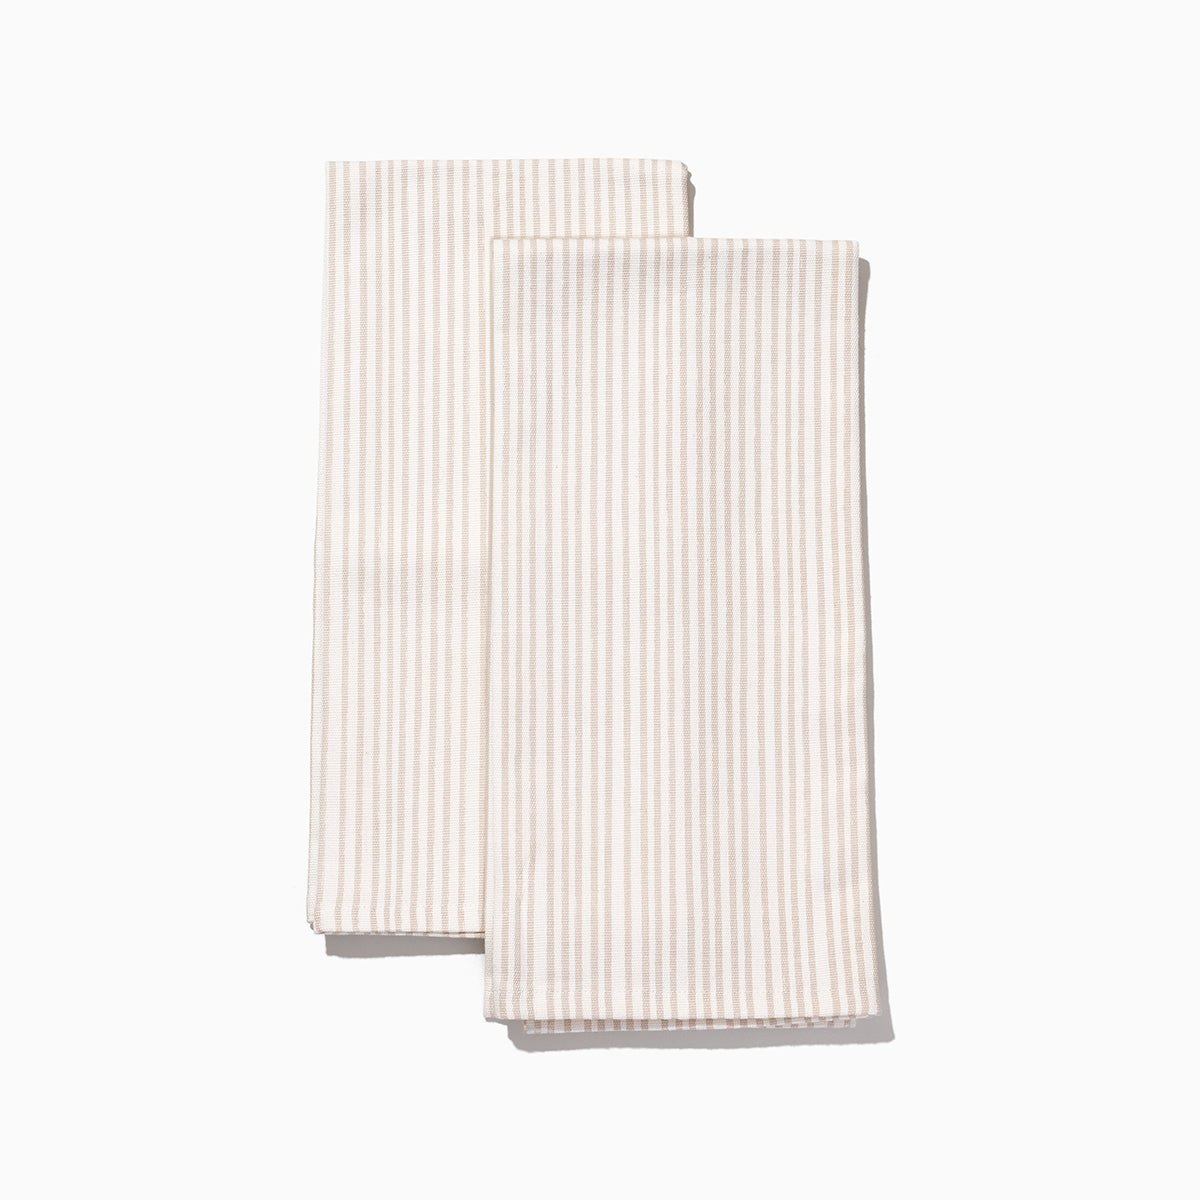 Tan Striped Dish Towel (Set of 2) | Product Image | Uncommon Lifestyle